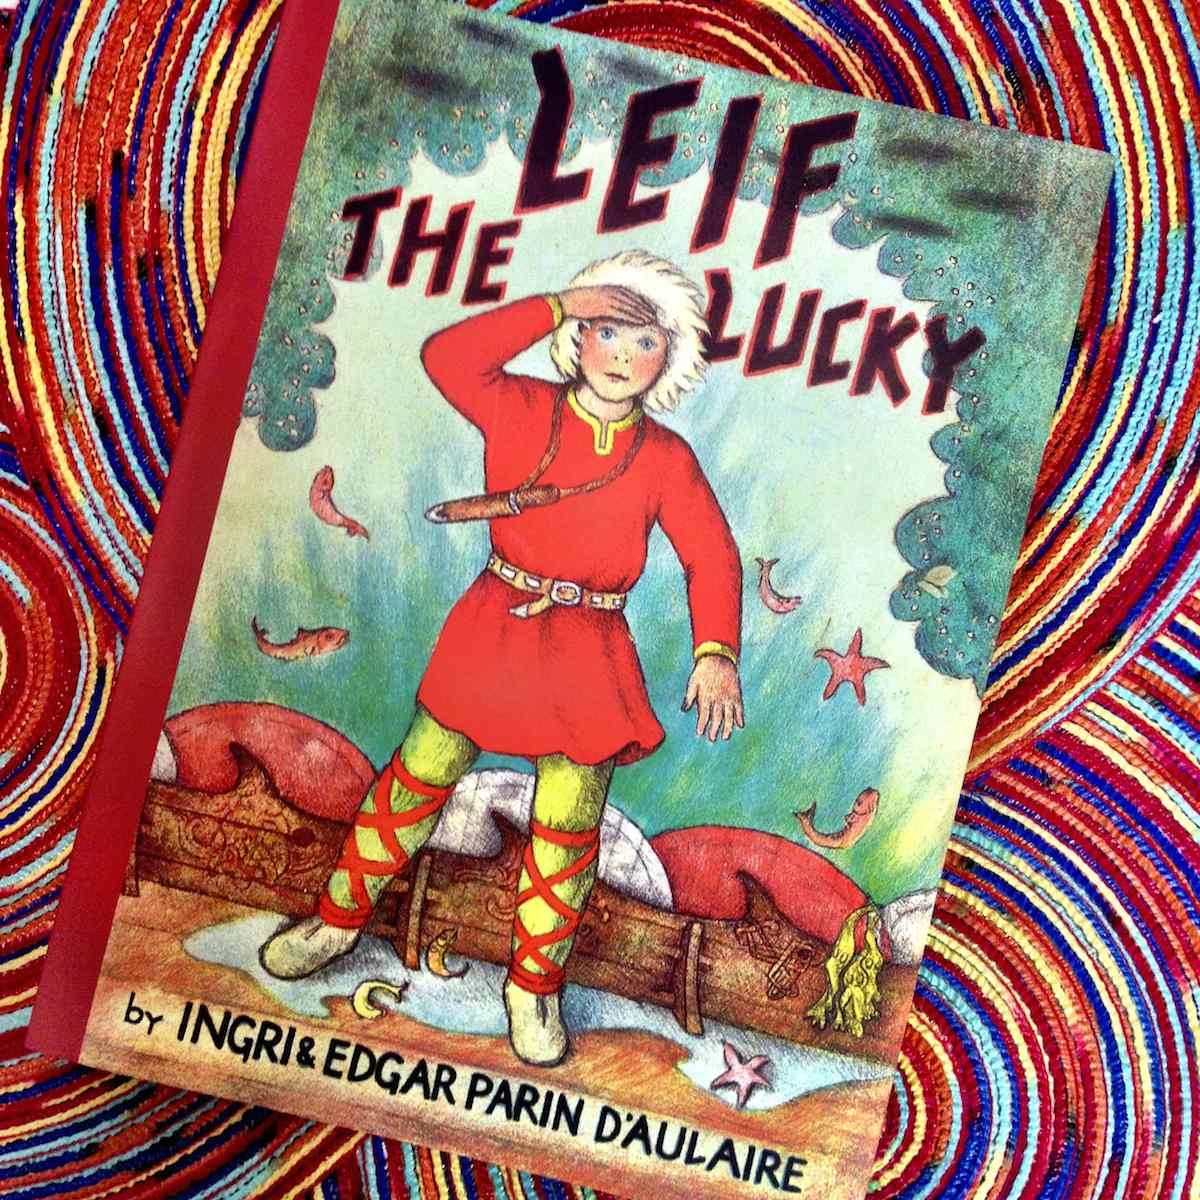 Leif the Lucky by Ingri d